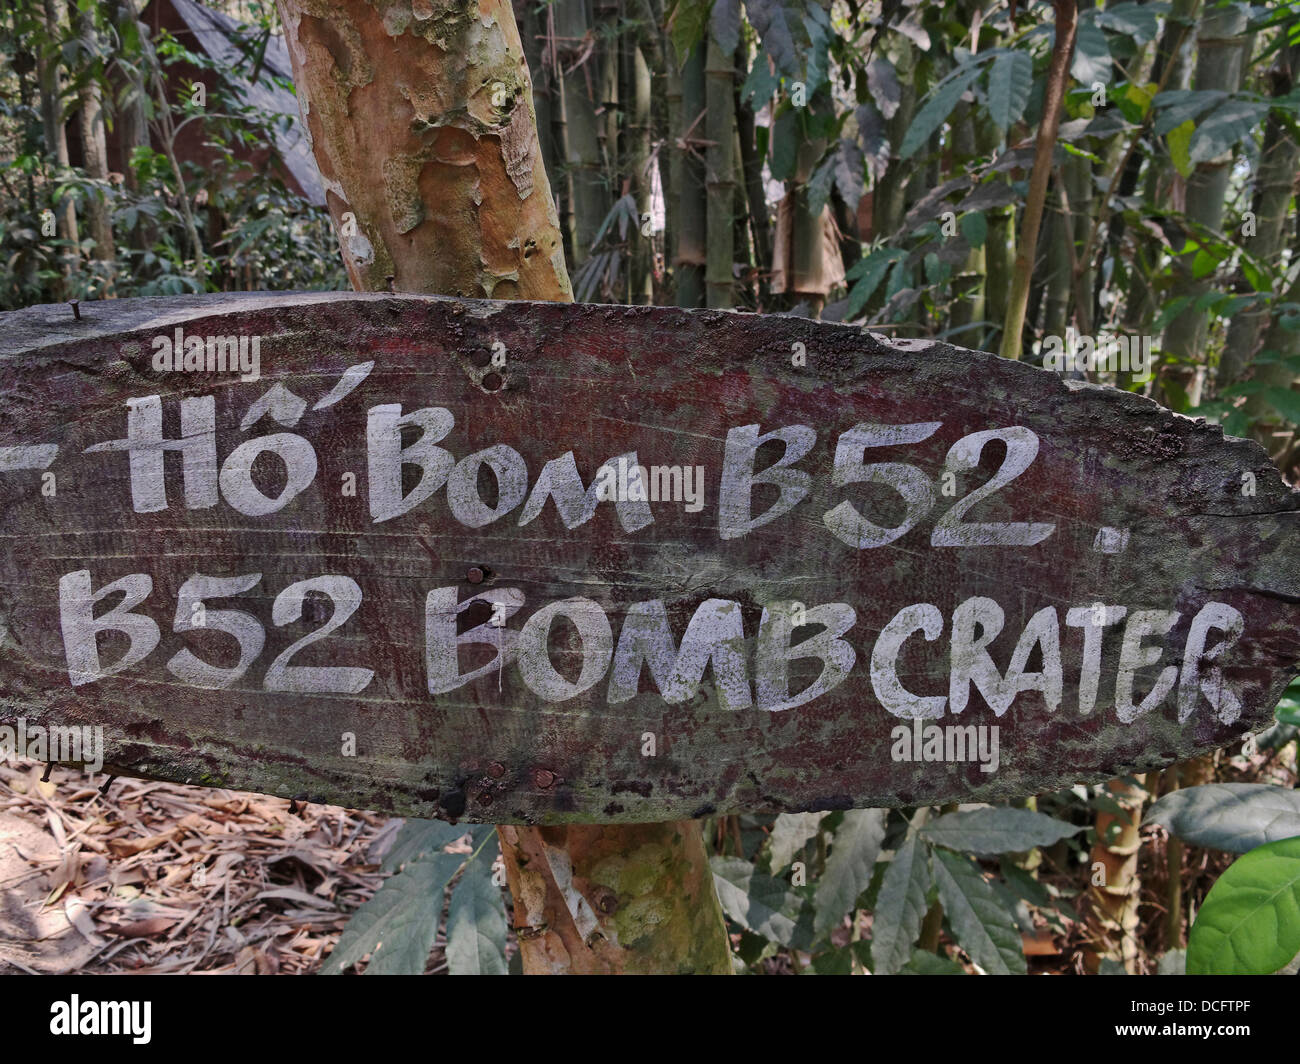 A sign indicating a bomb crater made by a USAF B-52 bomber during the Vietnam War. Cu Chi Tunnels, Saigon, Vietnam. Stock Photo